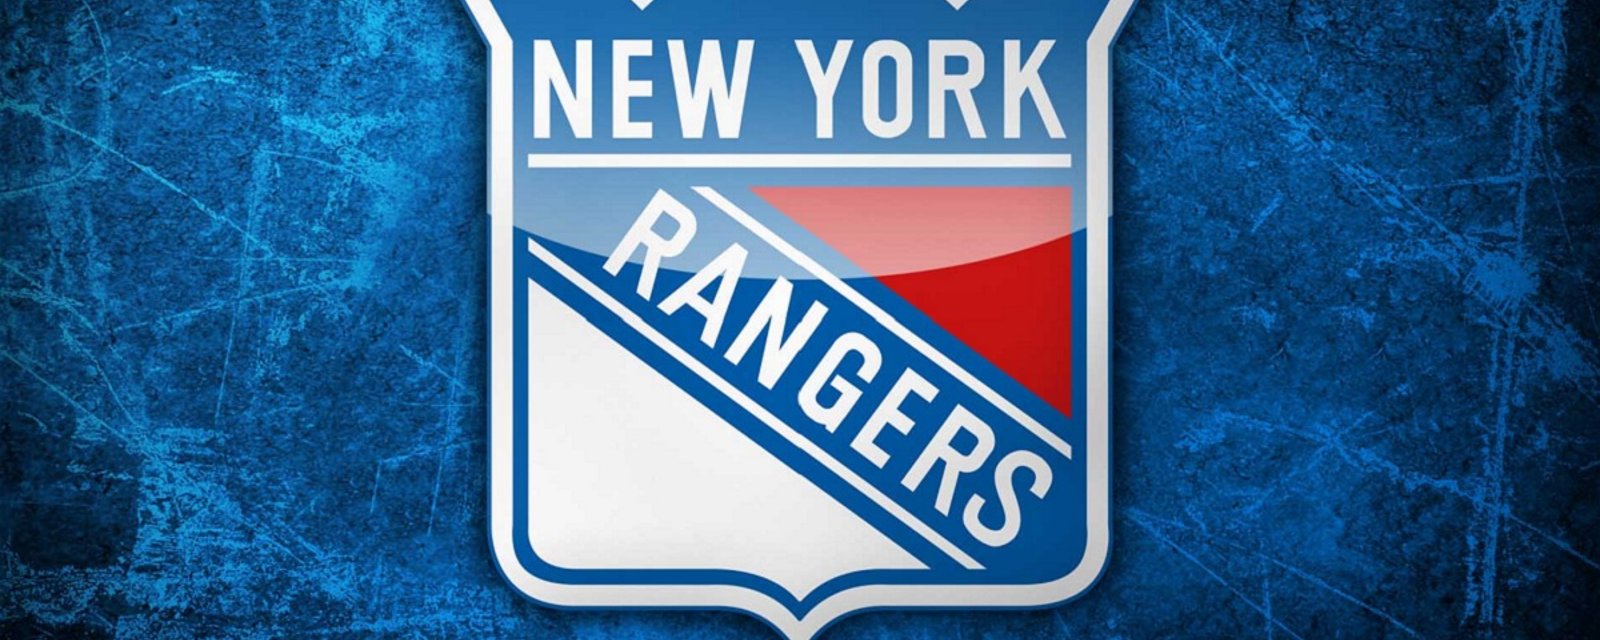 Rangers cut 13 players from their training camp roster on Sunday.